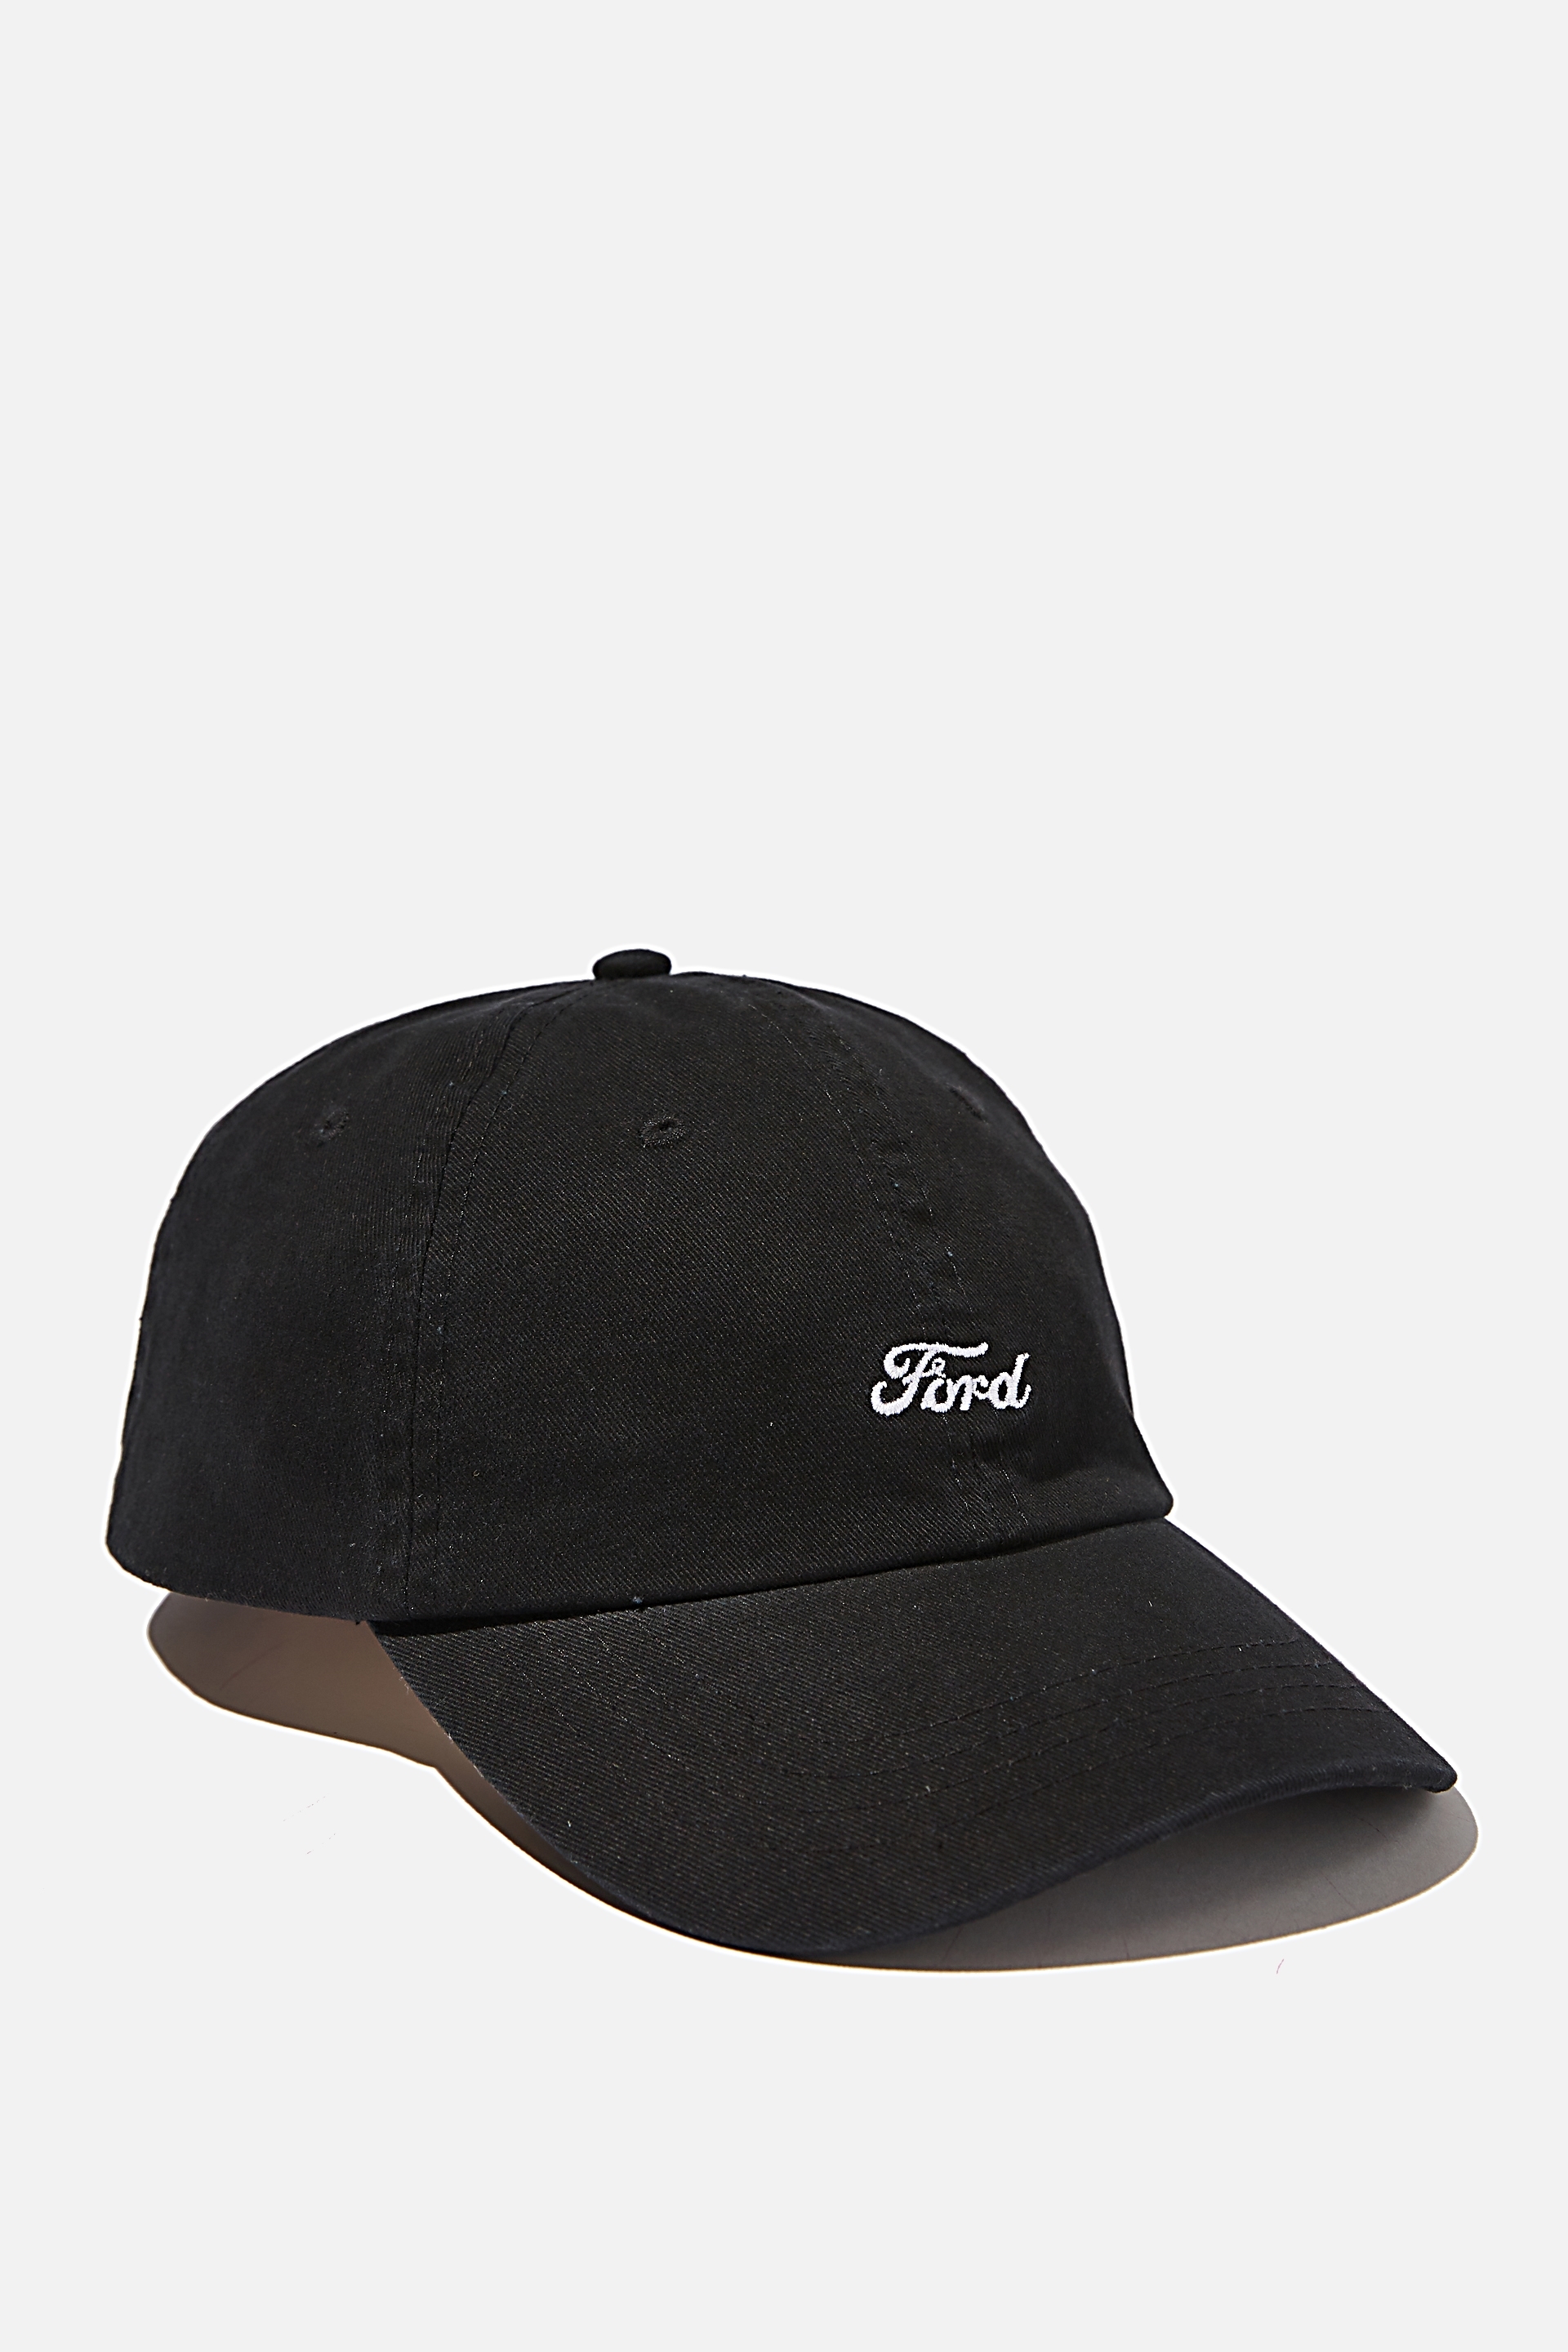 Ford Dad Hat